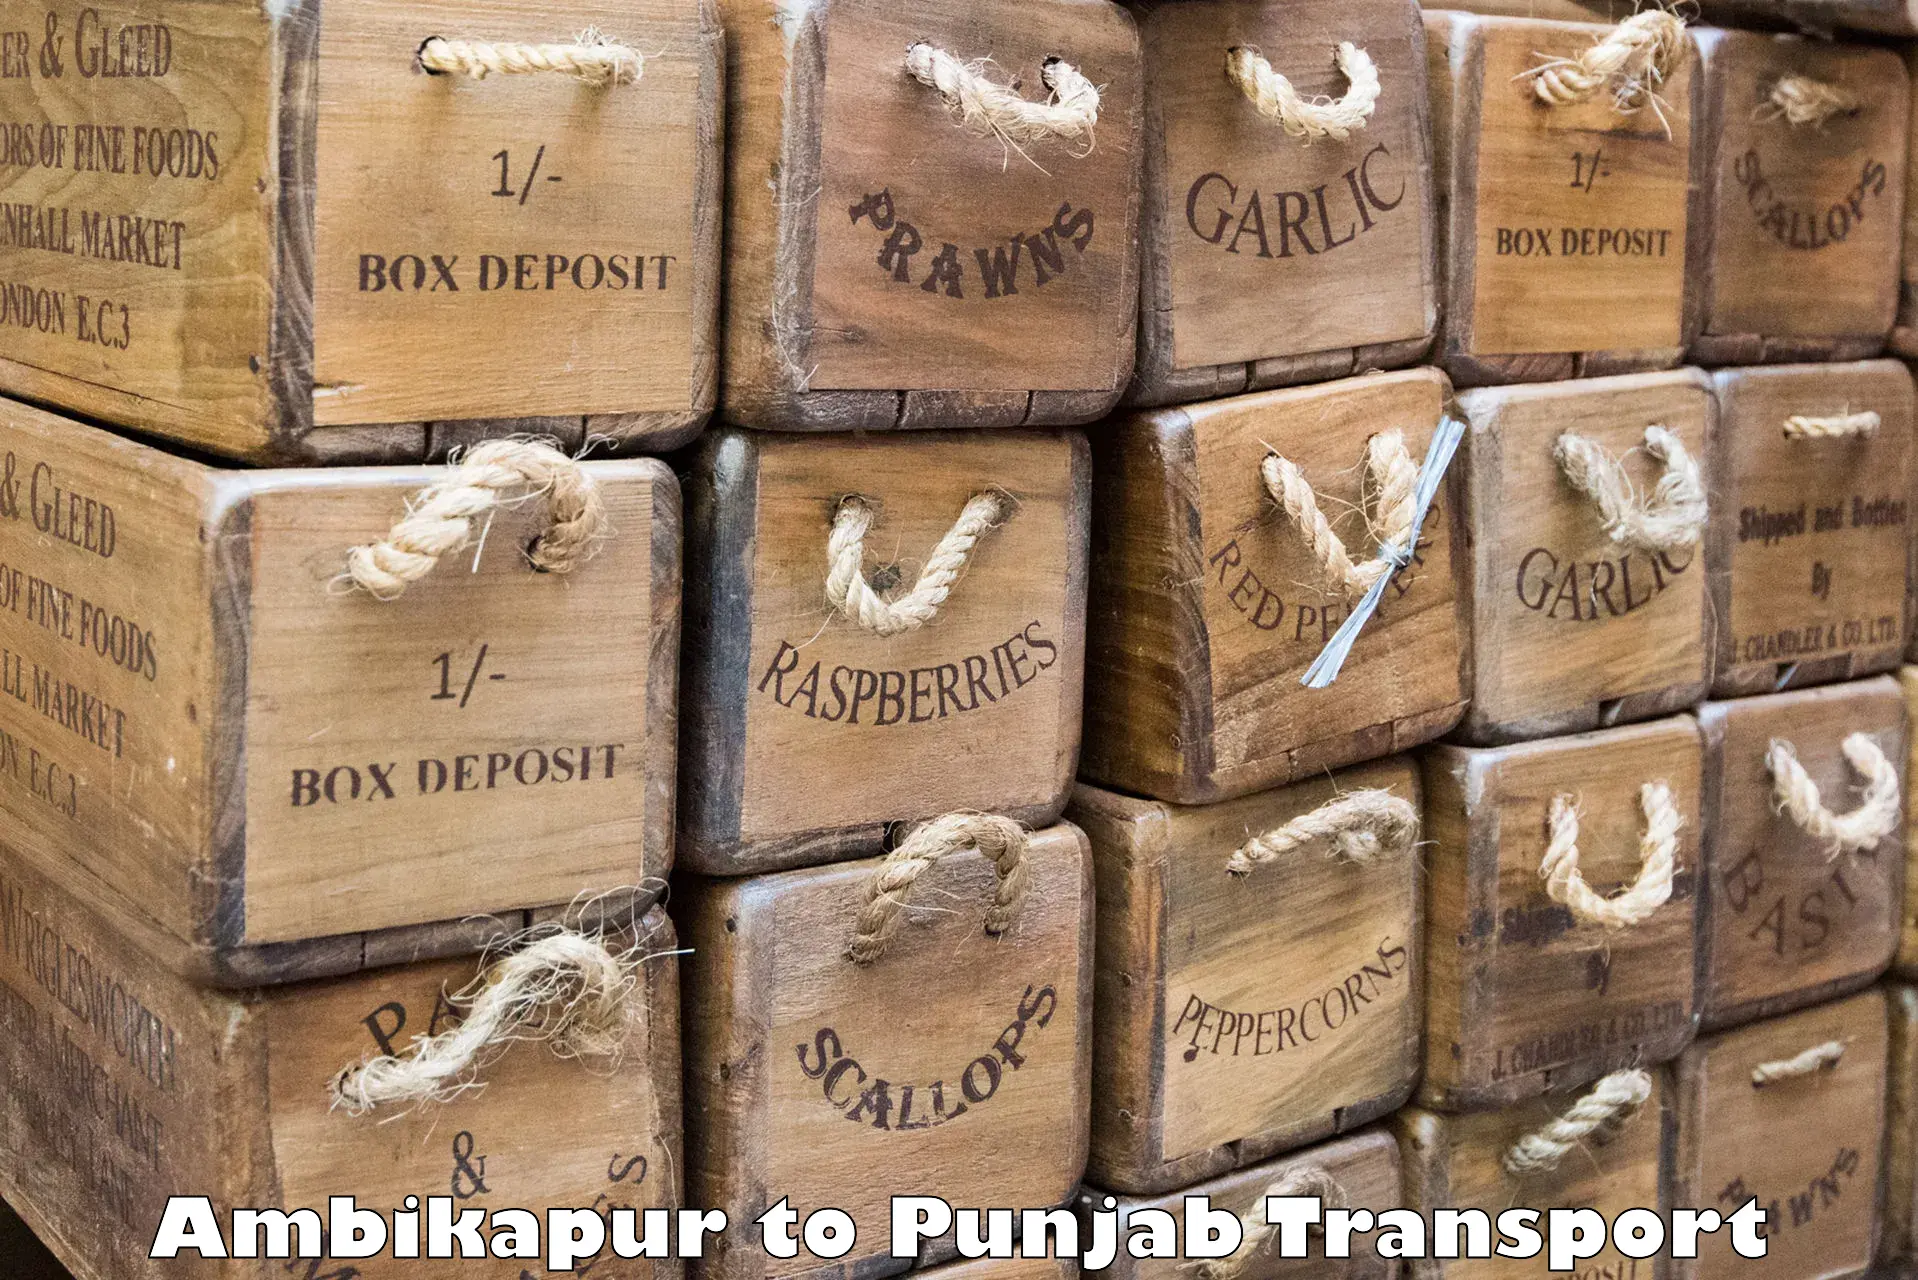 Container transport service Ambikapur to Tarsikka